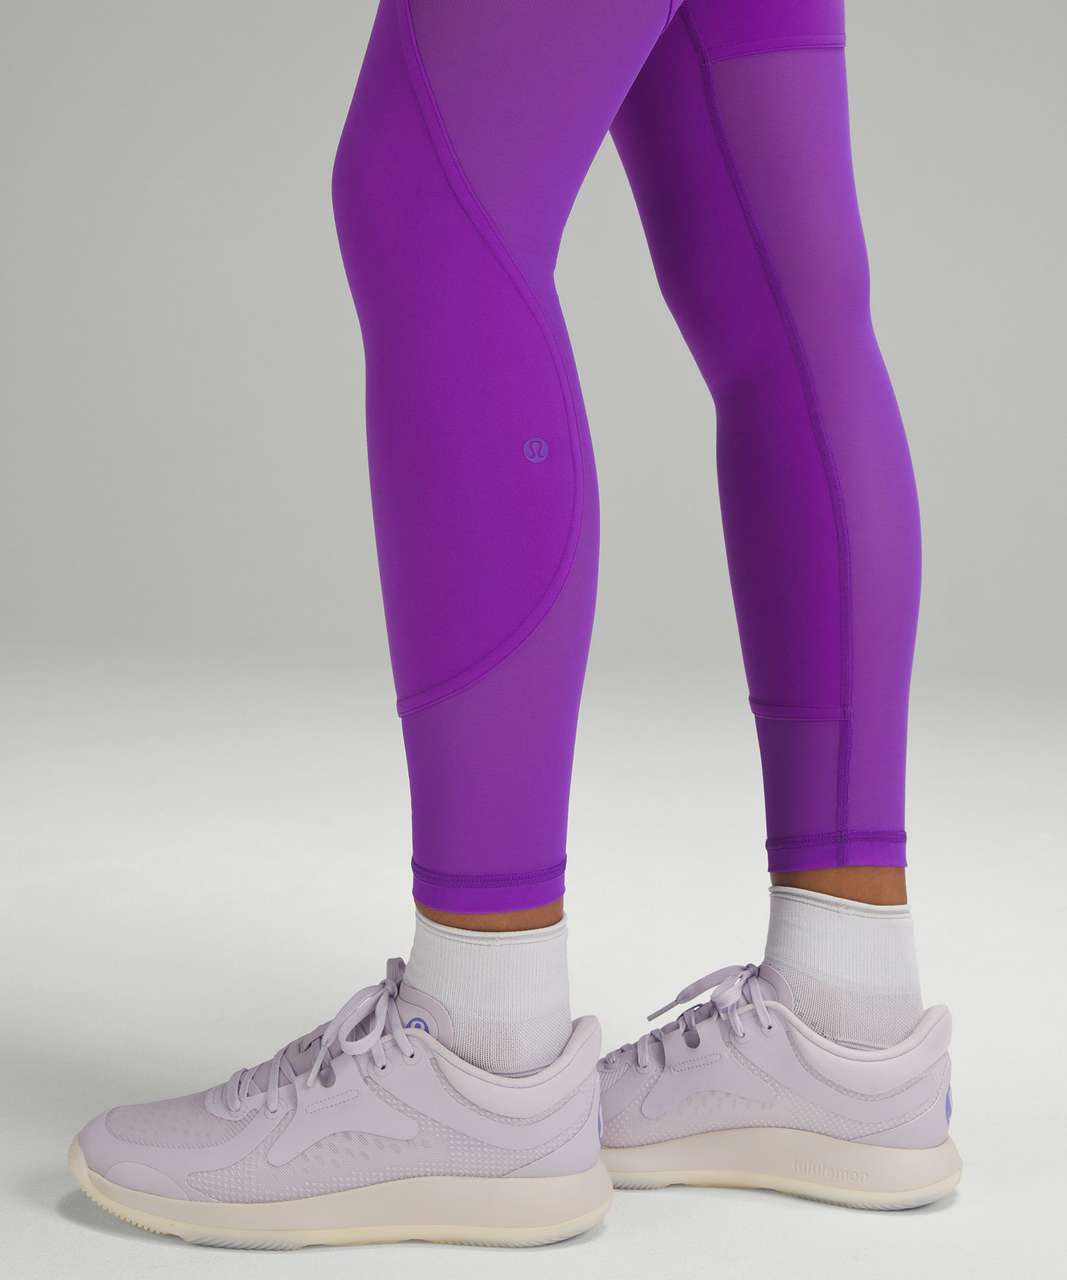 Lululemon Wunder Train High-Rise Tight 28 Dark Lavender Size 12 .New With  Tag.